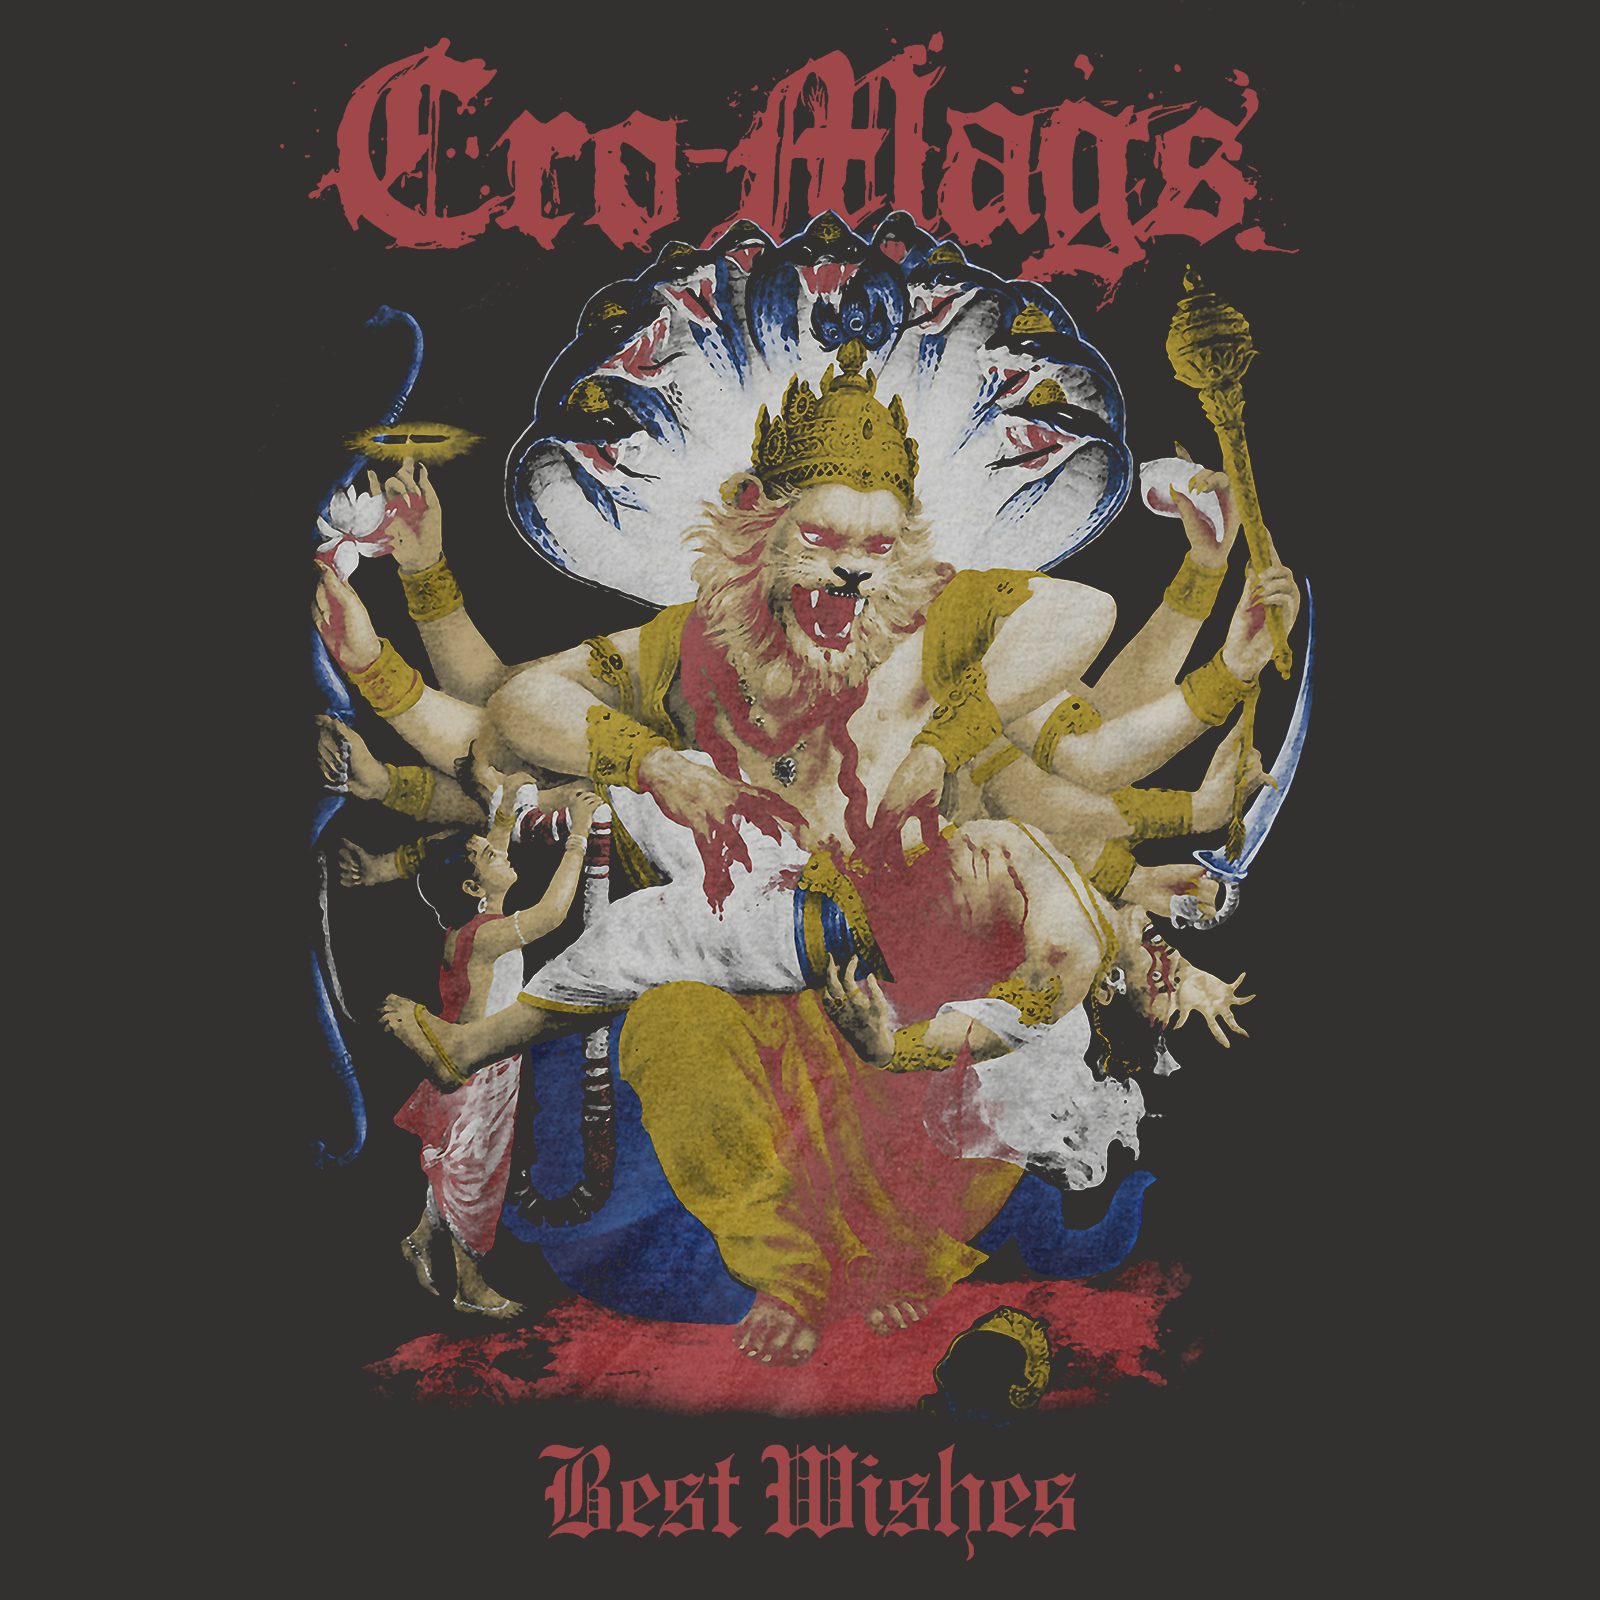 cro mags best wishes shirt